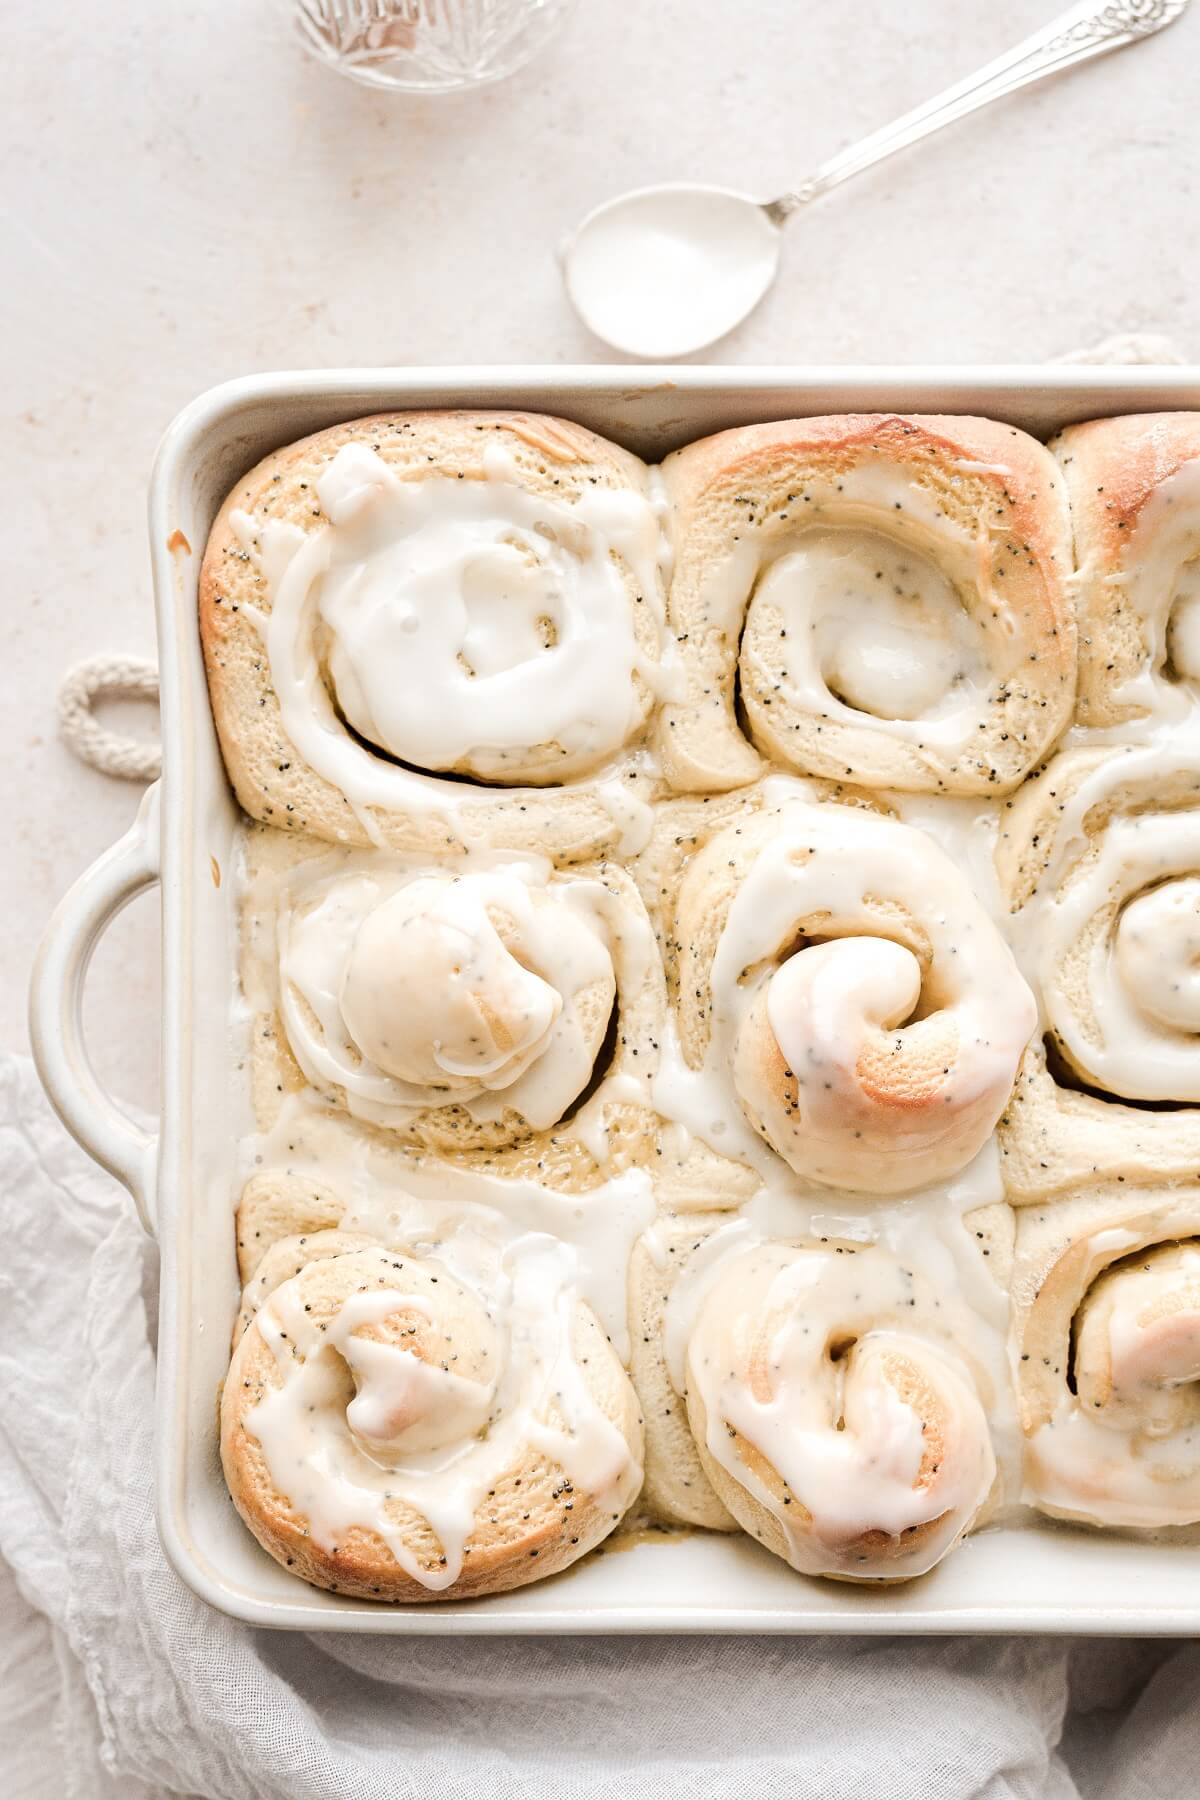 Lemon poppy seed rolls in a baking dish drizzled with lemon icing.